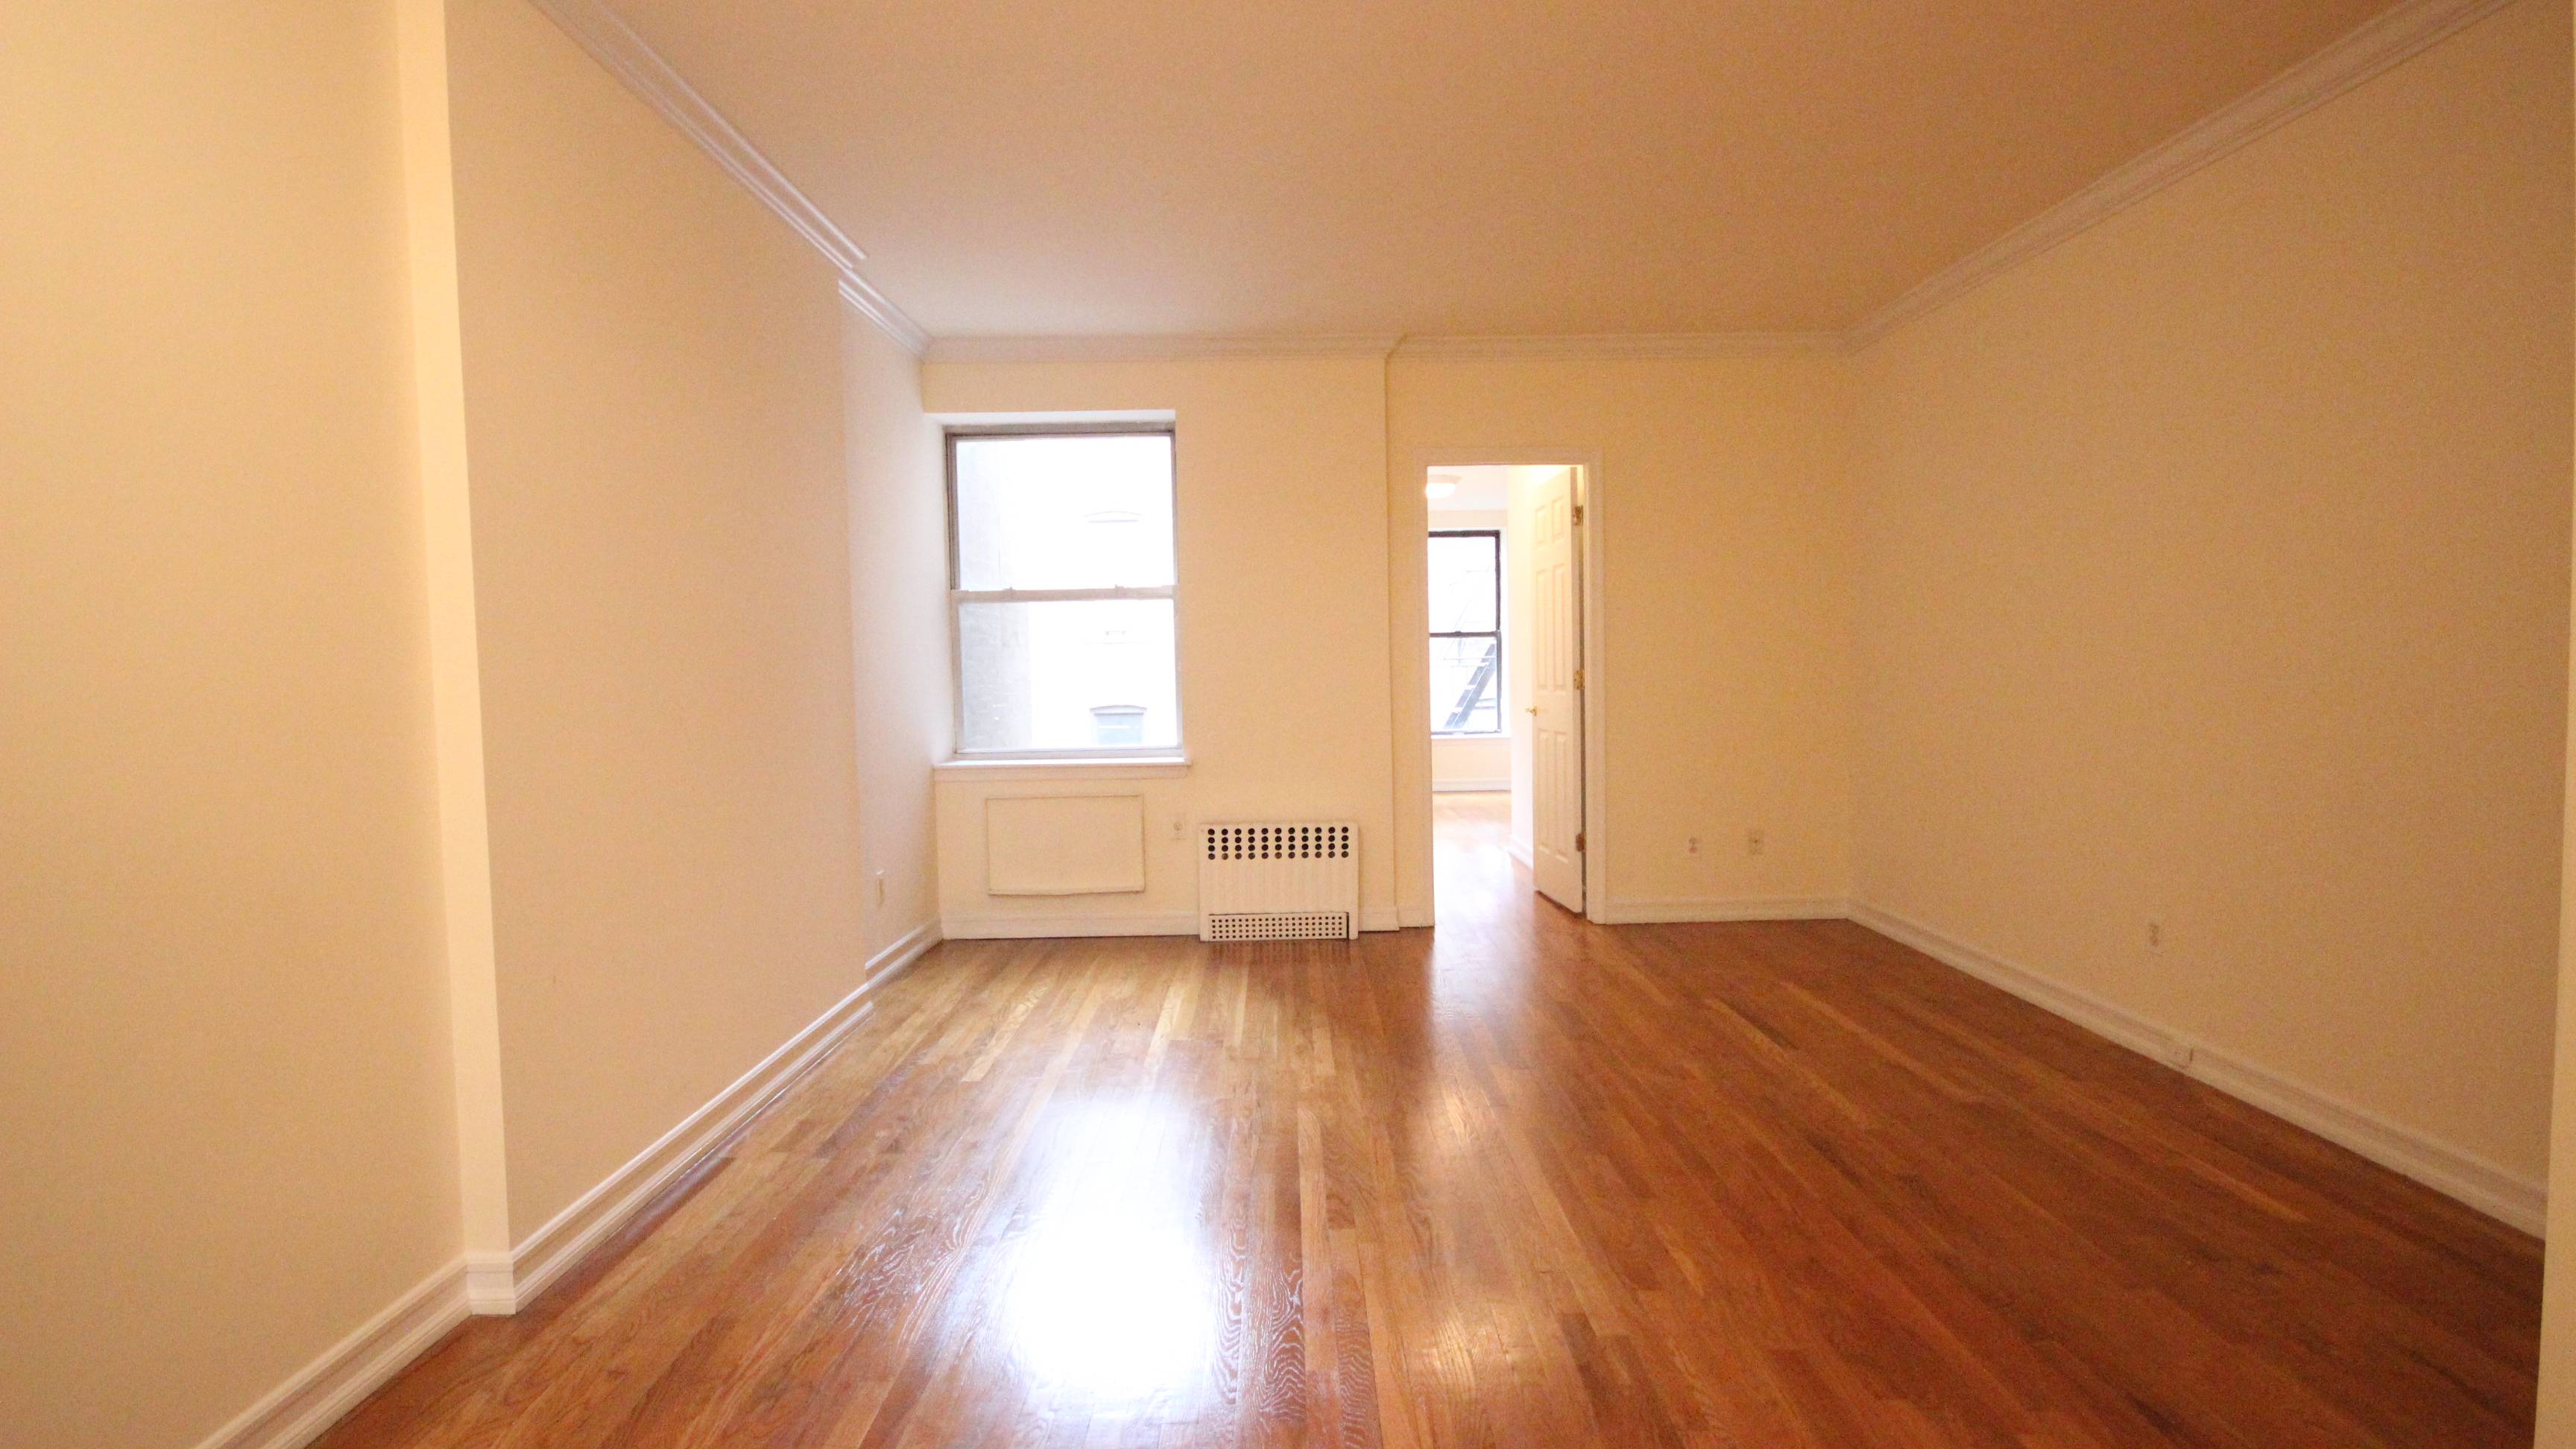 Charming One Bedroom, One Bathroom Apartment on Upper West Side near Columbia University